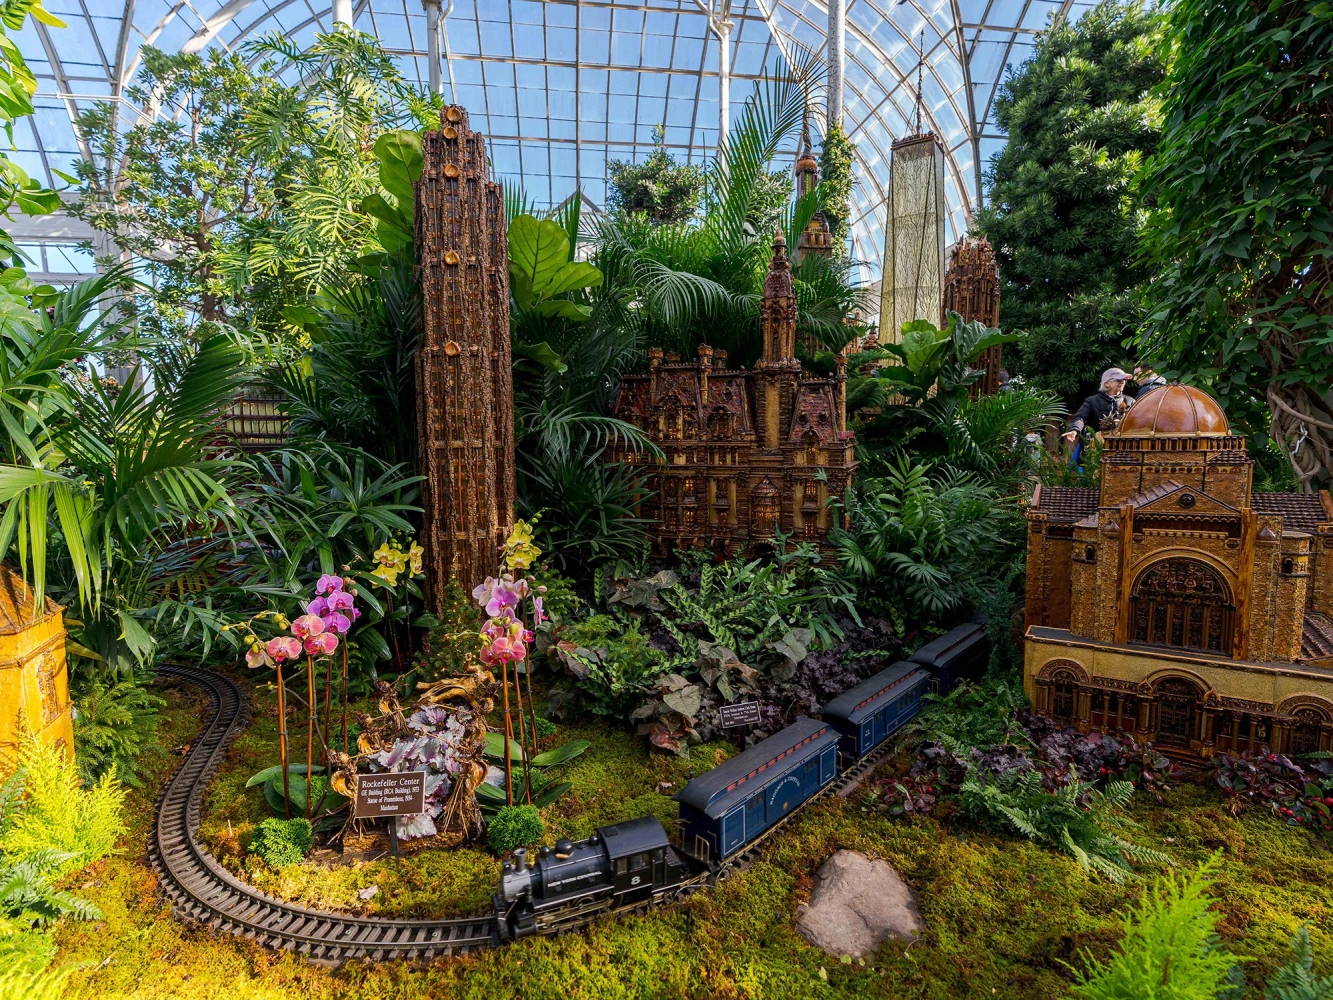 Holiday Train Show: What to expect - 1